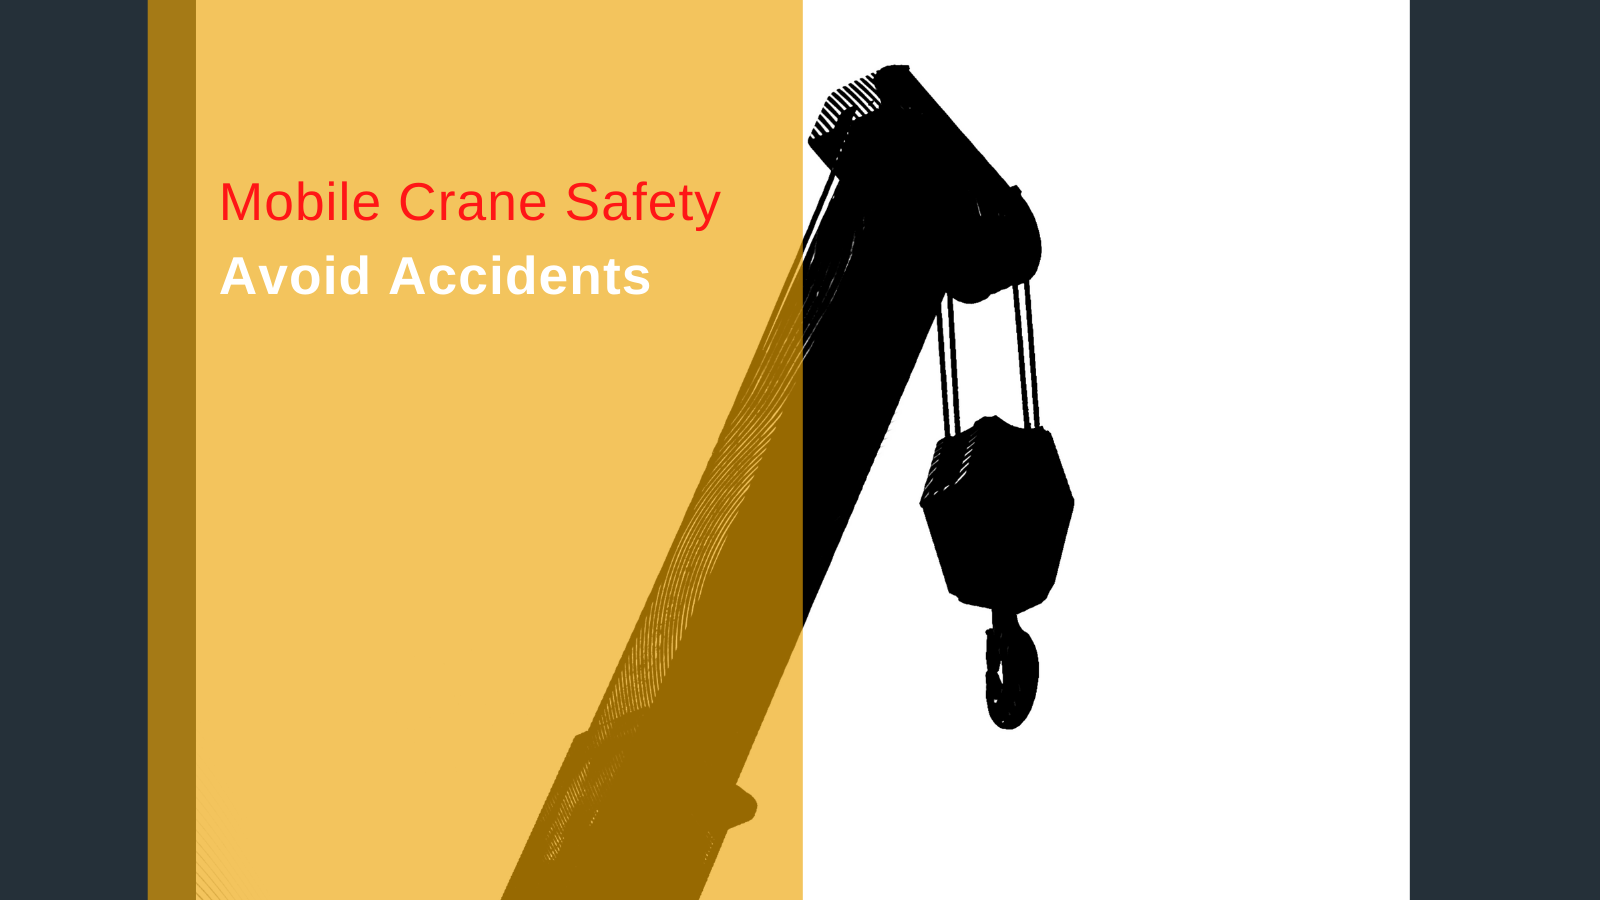 Mobile Crane Safety - Avoid Accidents